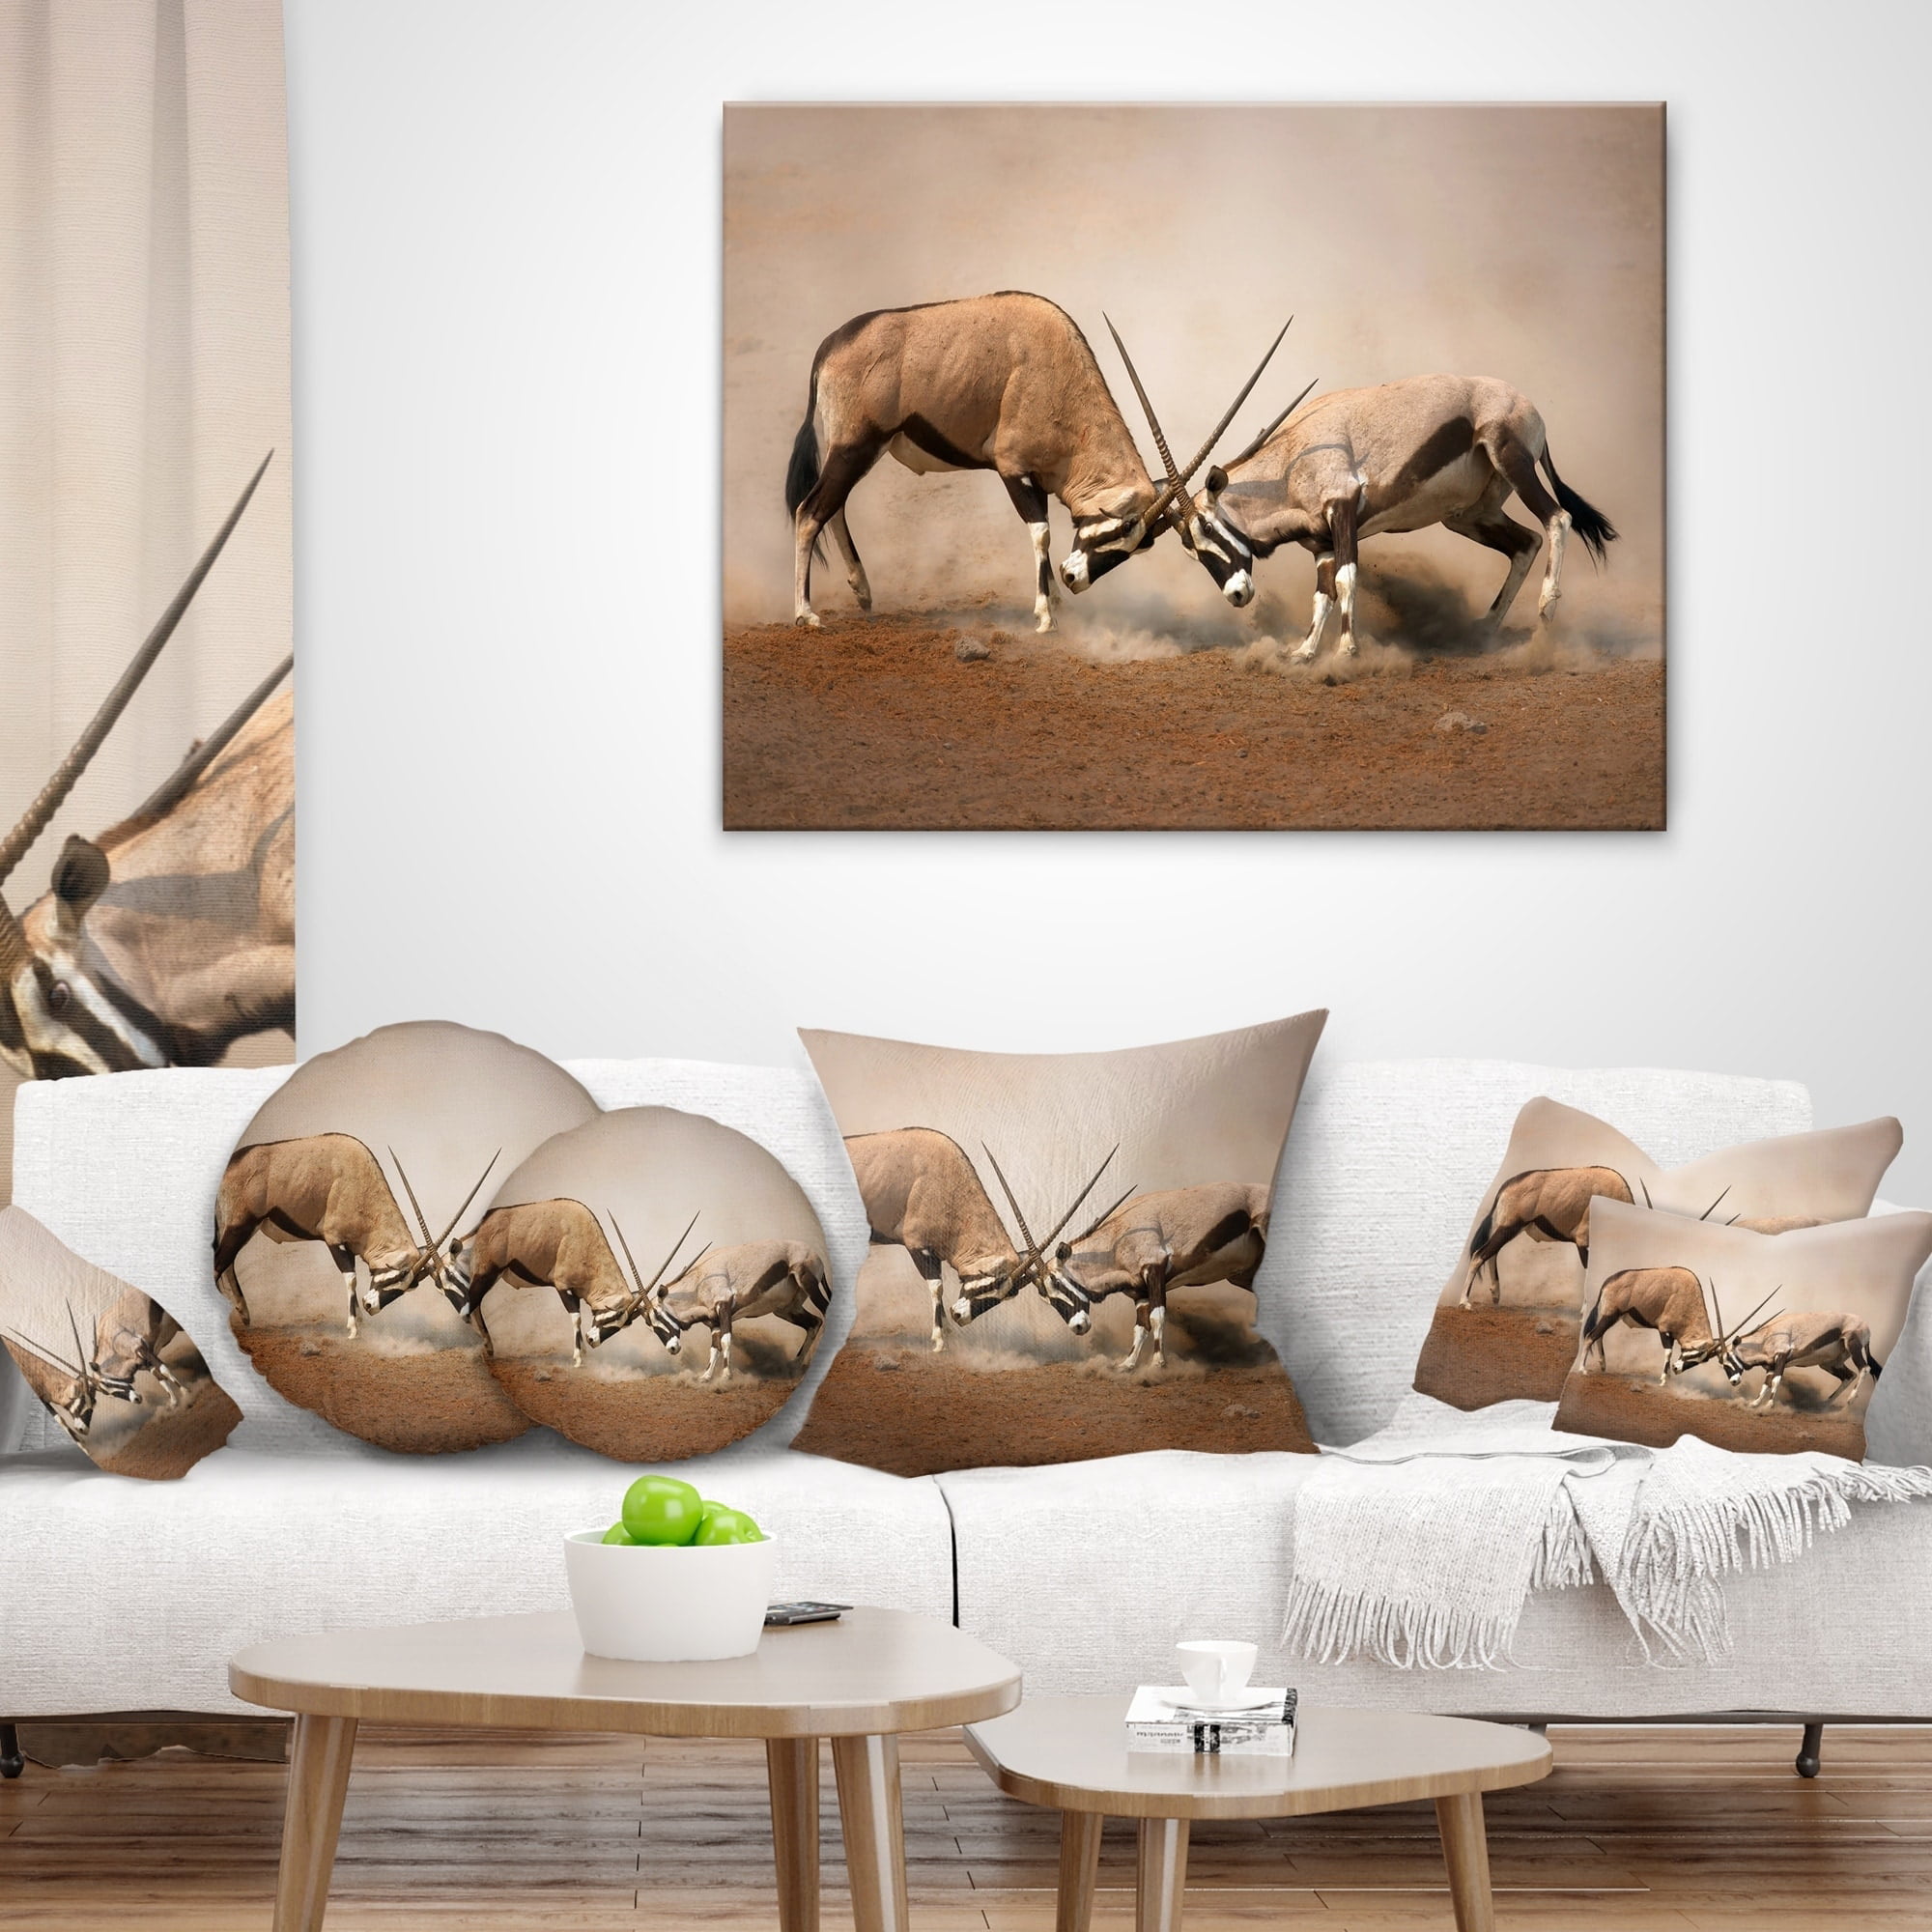 Designart CU13265-16-16 Gemsbok Antelopes Fighting African Wall Cushion Cover for Living Room in x 16 in Insert Printed On Both Side Sofa Throw Pillow 16 in